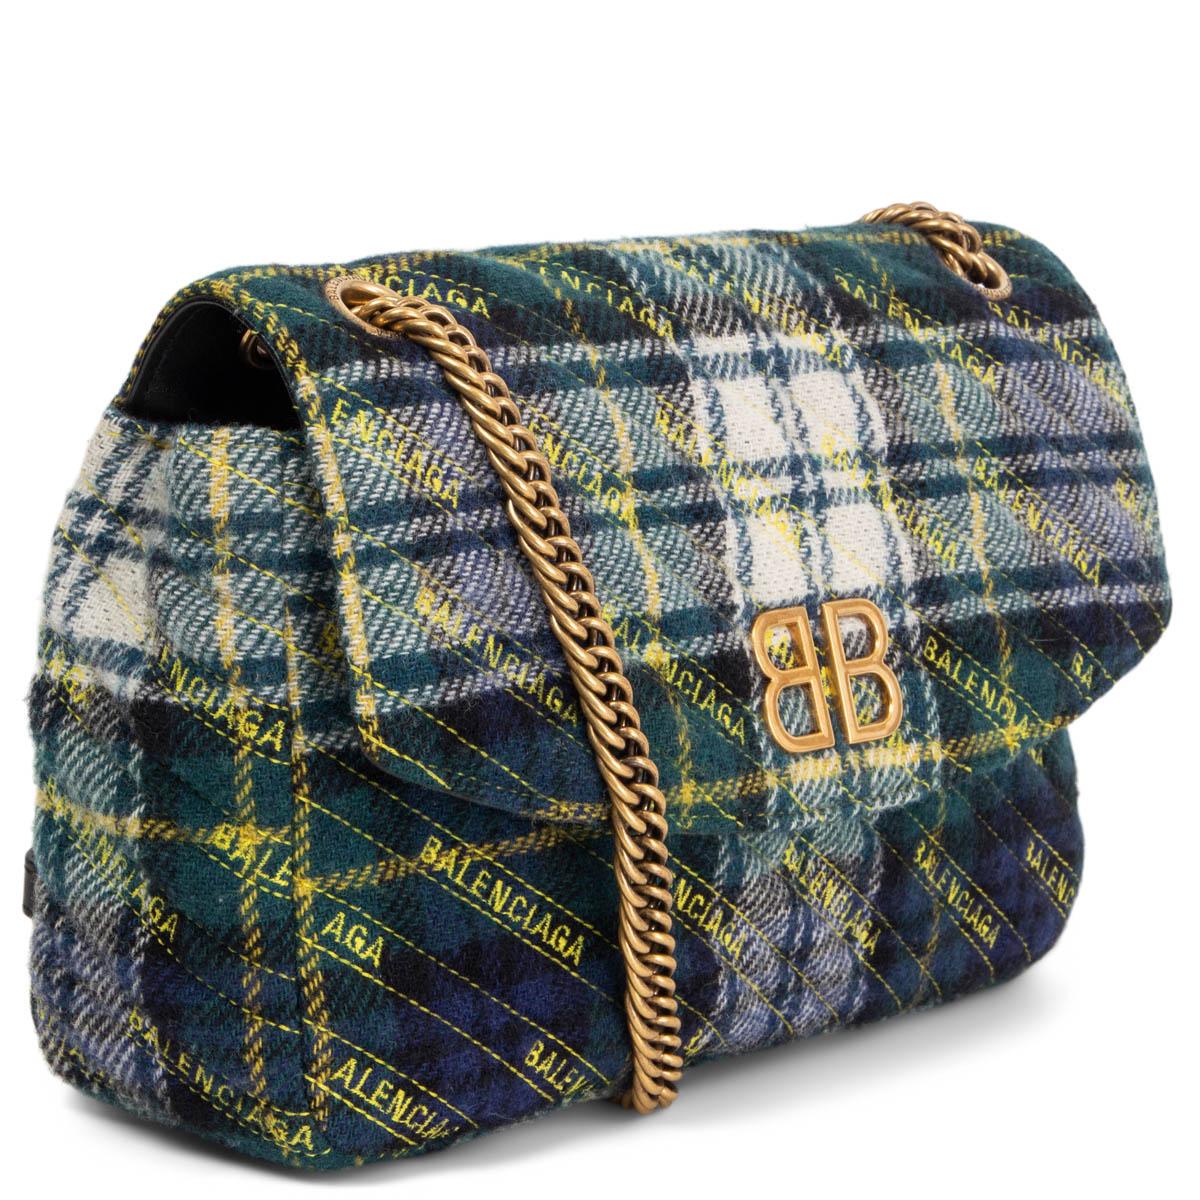 100% authentic Balenciaga BB Medium Chain Quilted Tartan Shoulder Bag in petrol, yellow, blue and off-white wool featuring gold-tone chain shoulder-strap and BB metal logo at front. Opens with a flap and magnetic button. Lined in black smooth